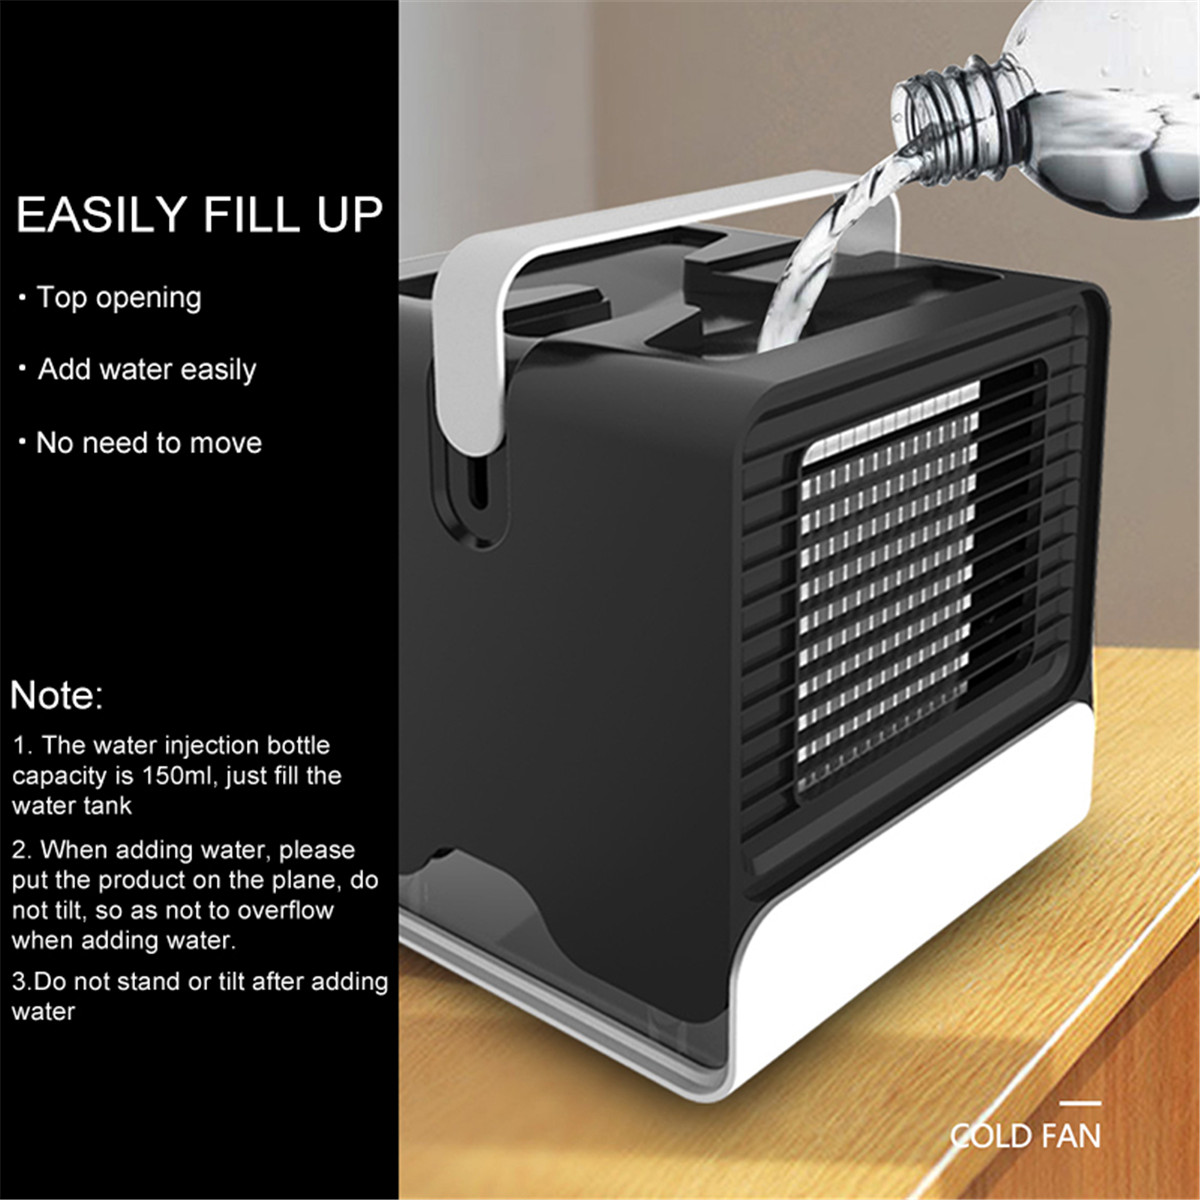 Mini-Portable-Air-Conditioner-Night-Light-Conditioning-Cooler-Humidifier-Purifier-USB-Desktop-Air-Co-1710195-6